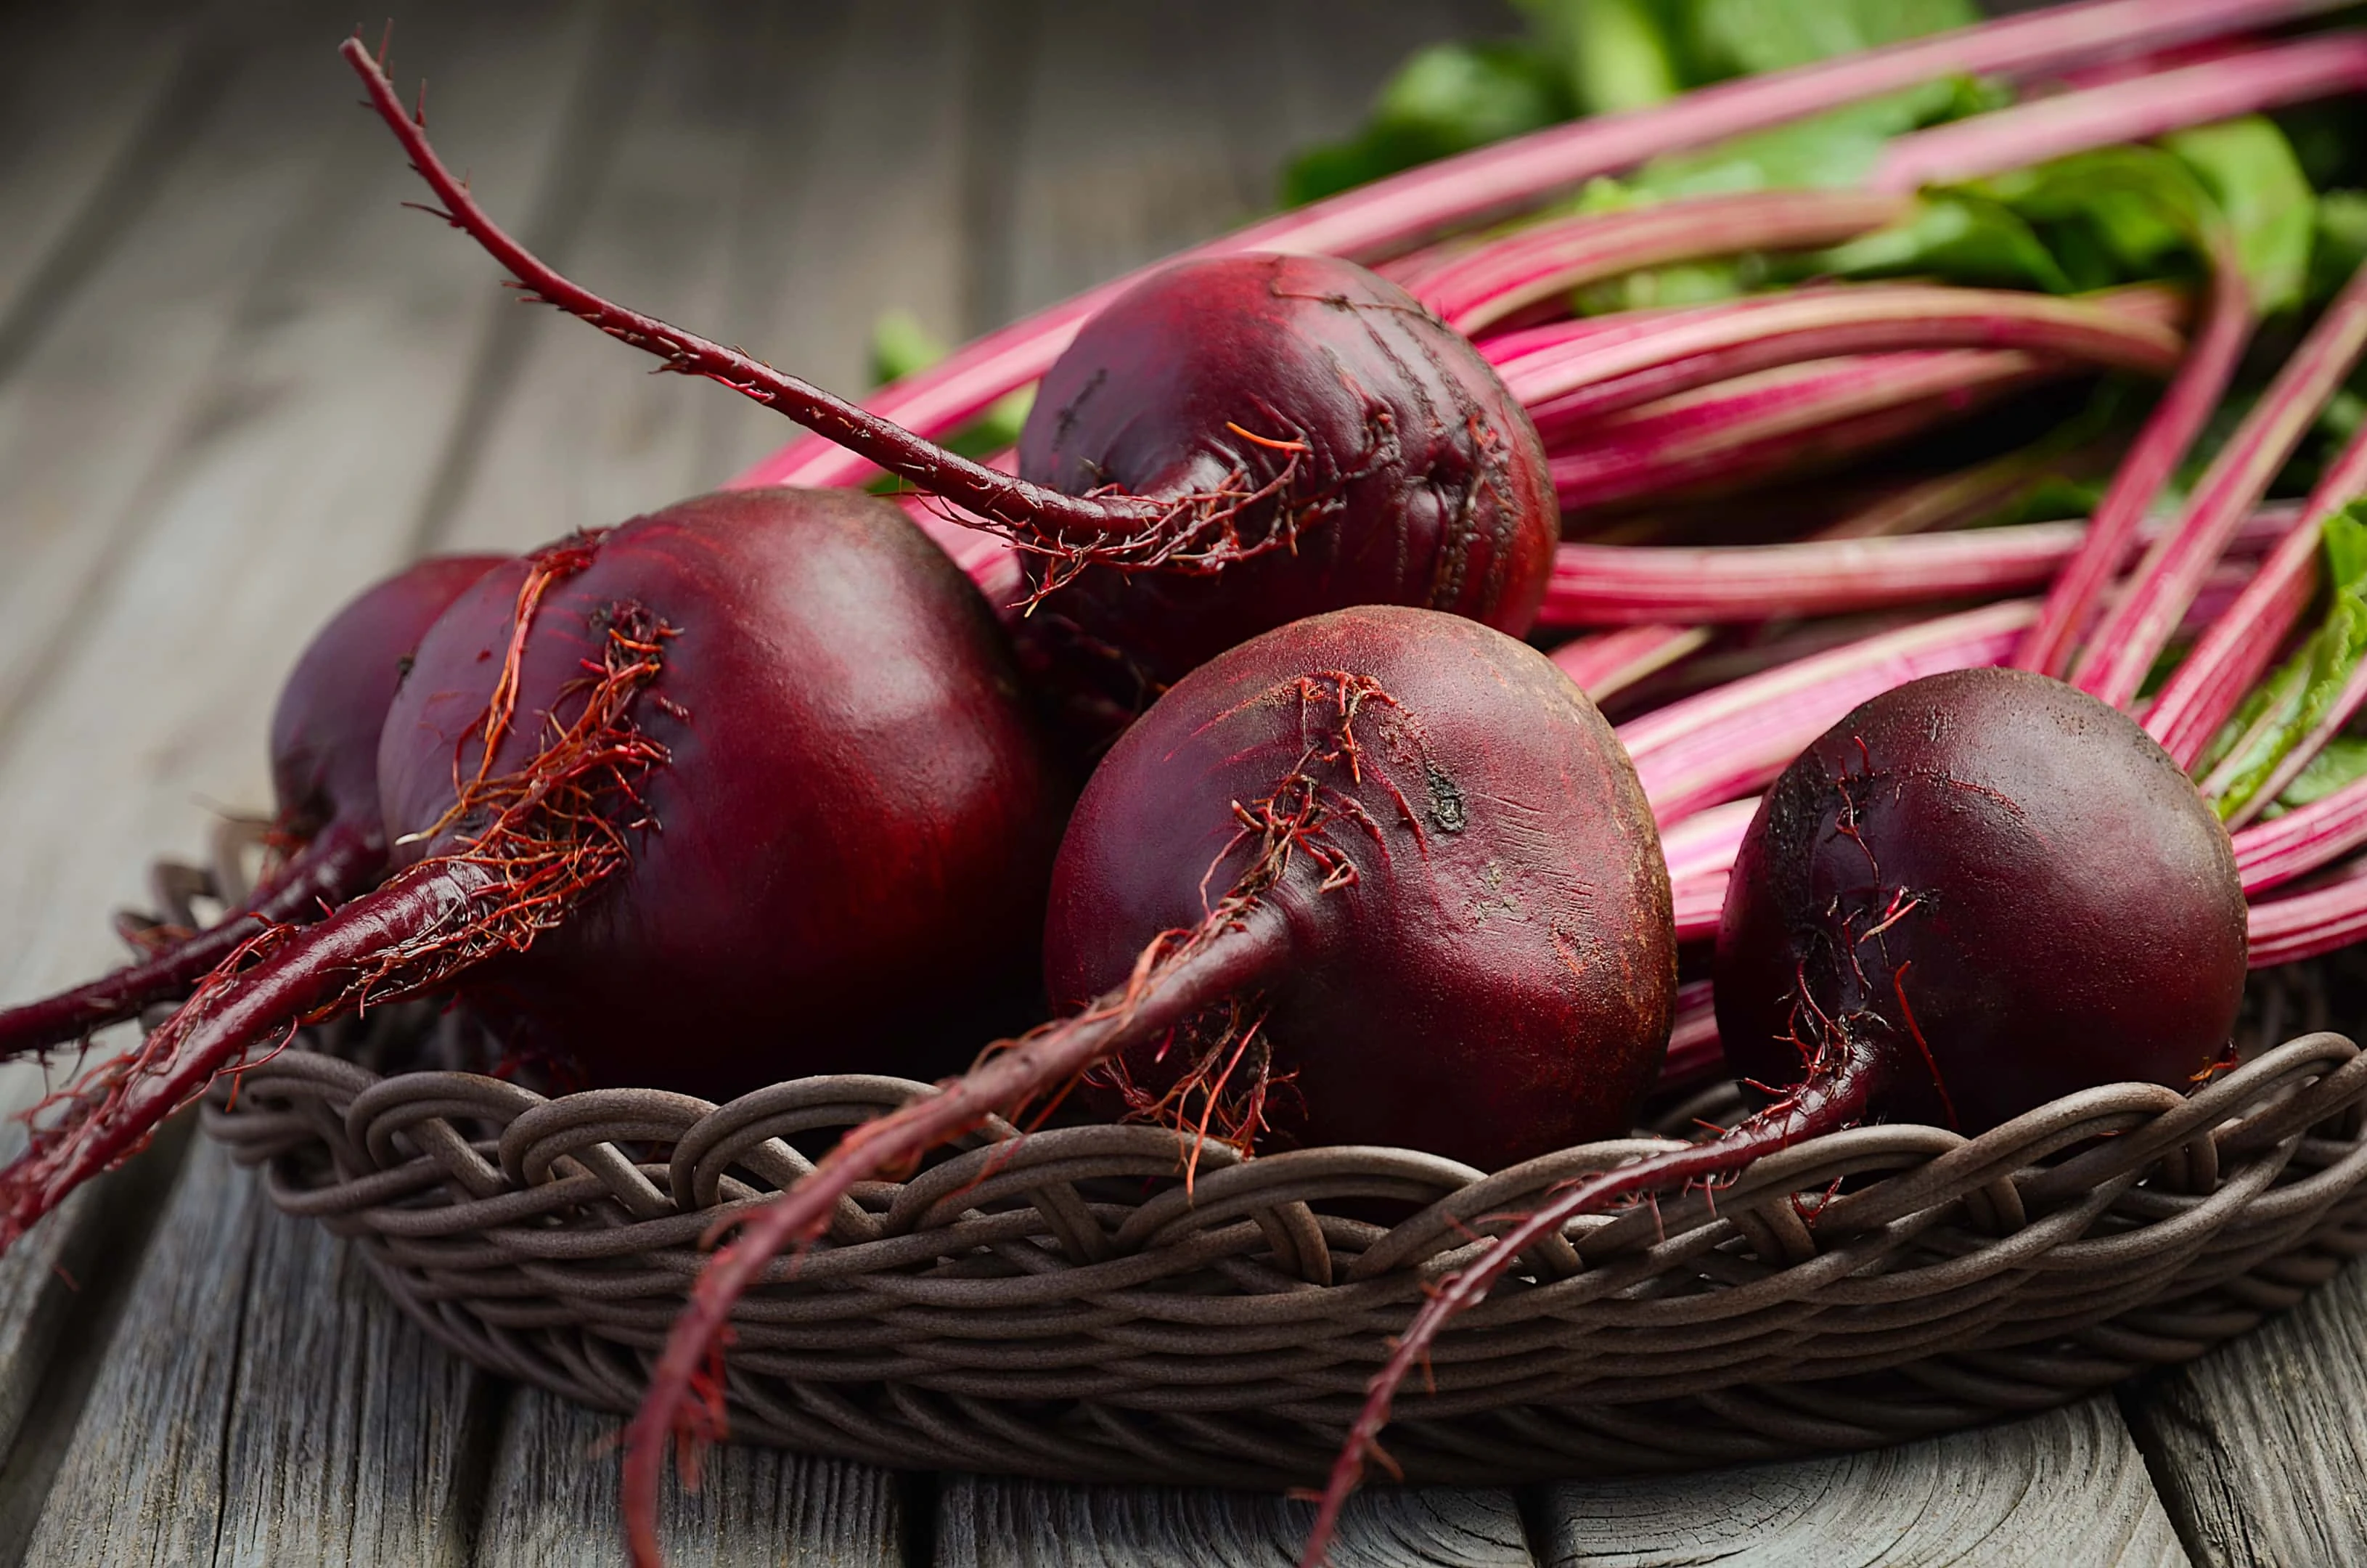 Fresh beets on rustic wooden table